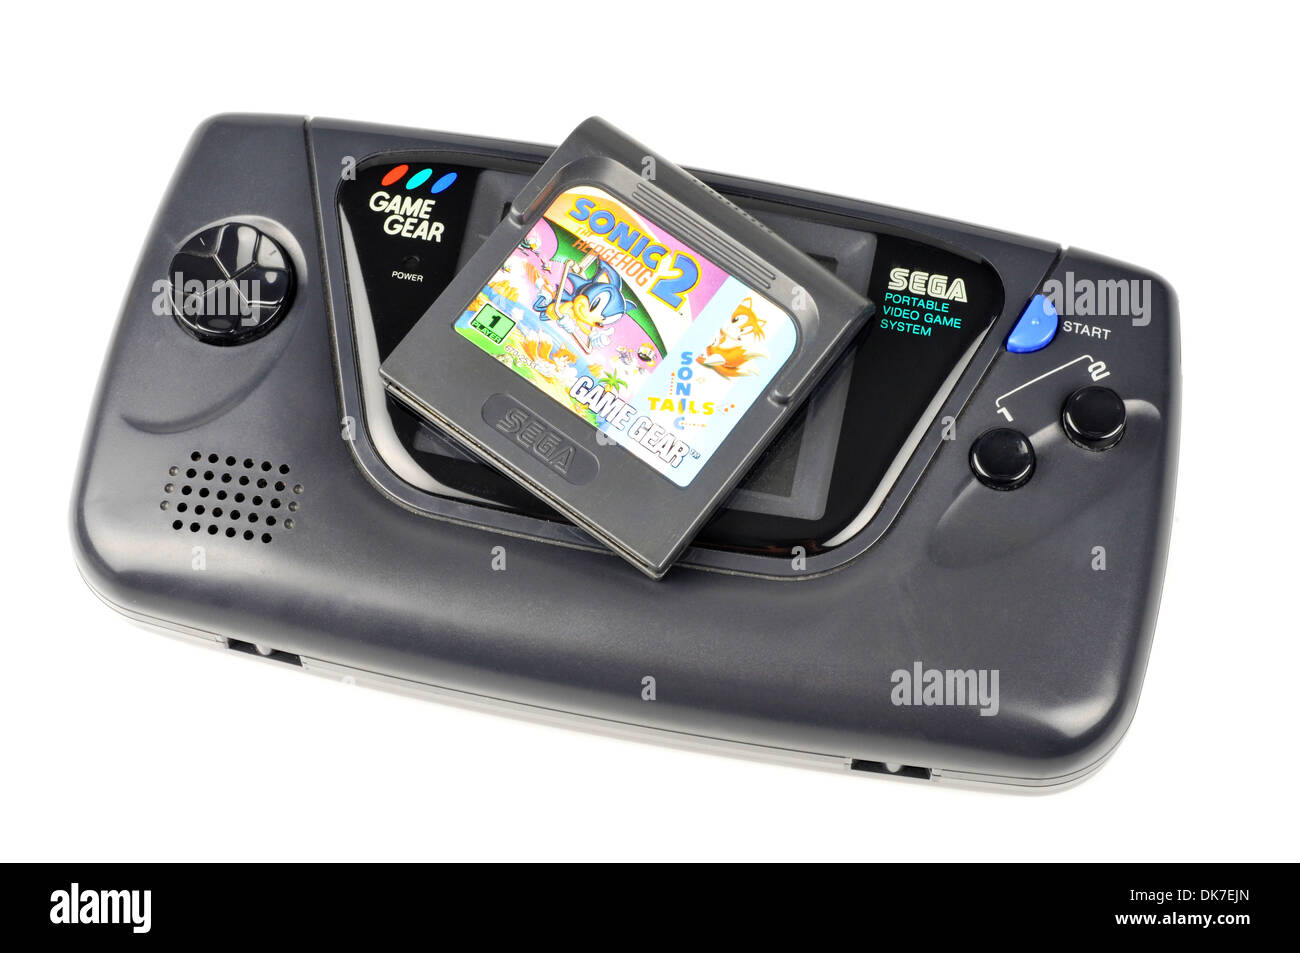 Sega Game Gear Portable video game system from the 1990's Stock Photo